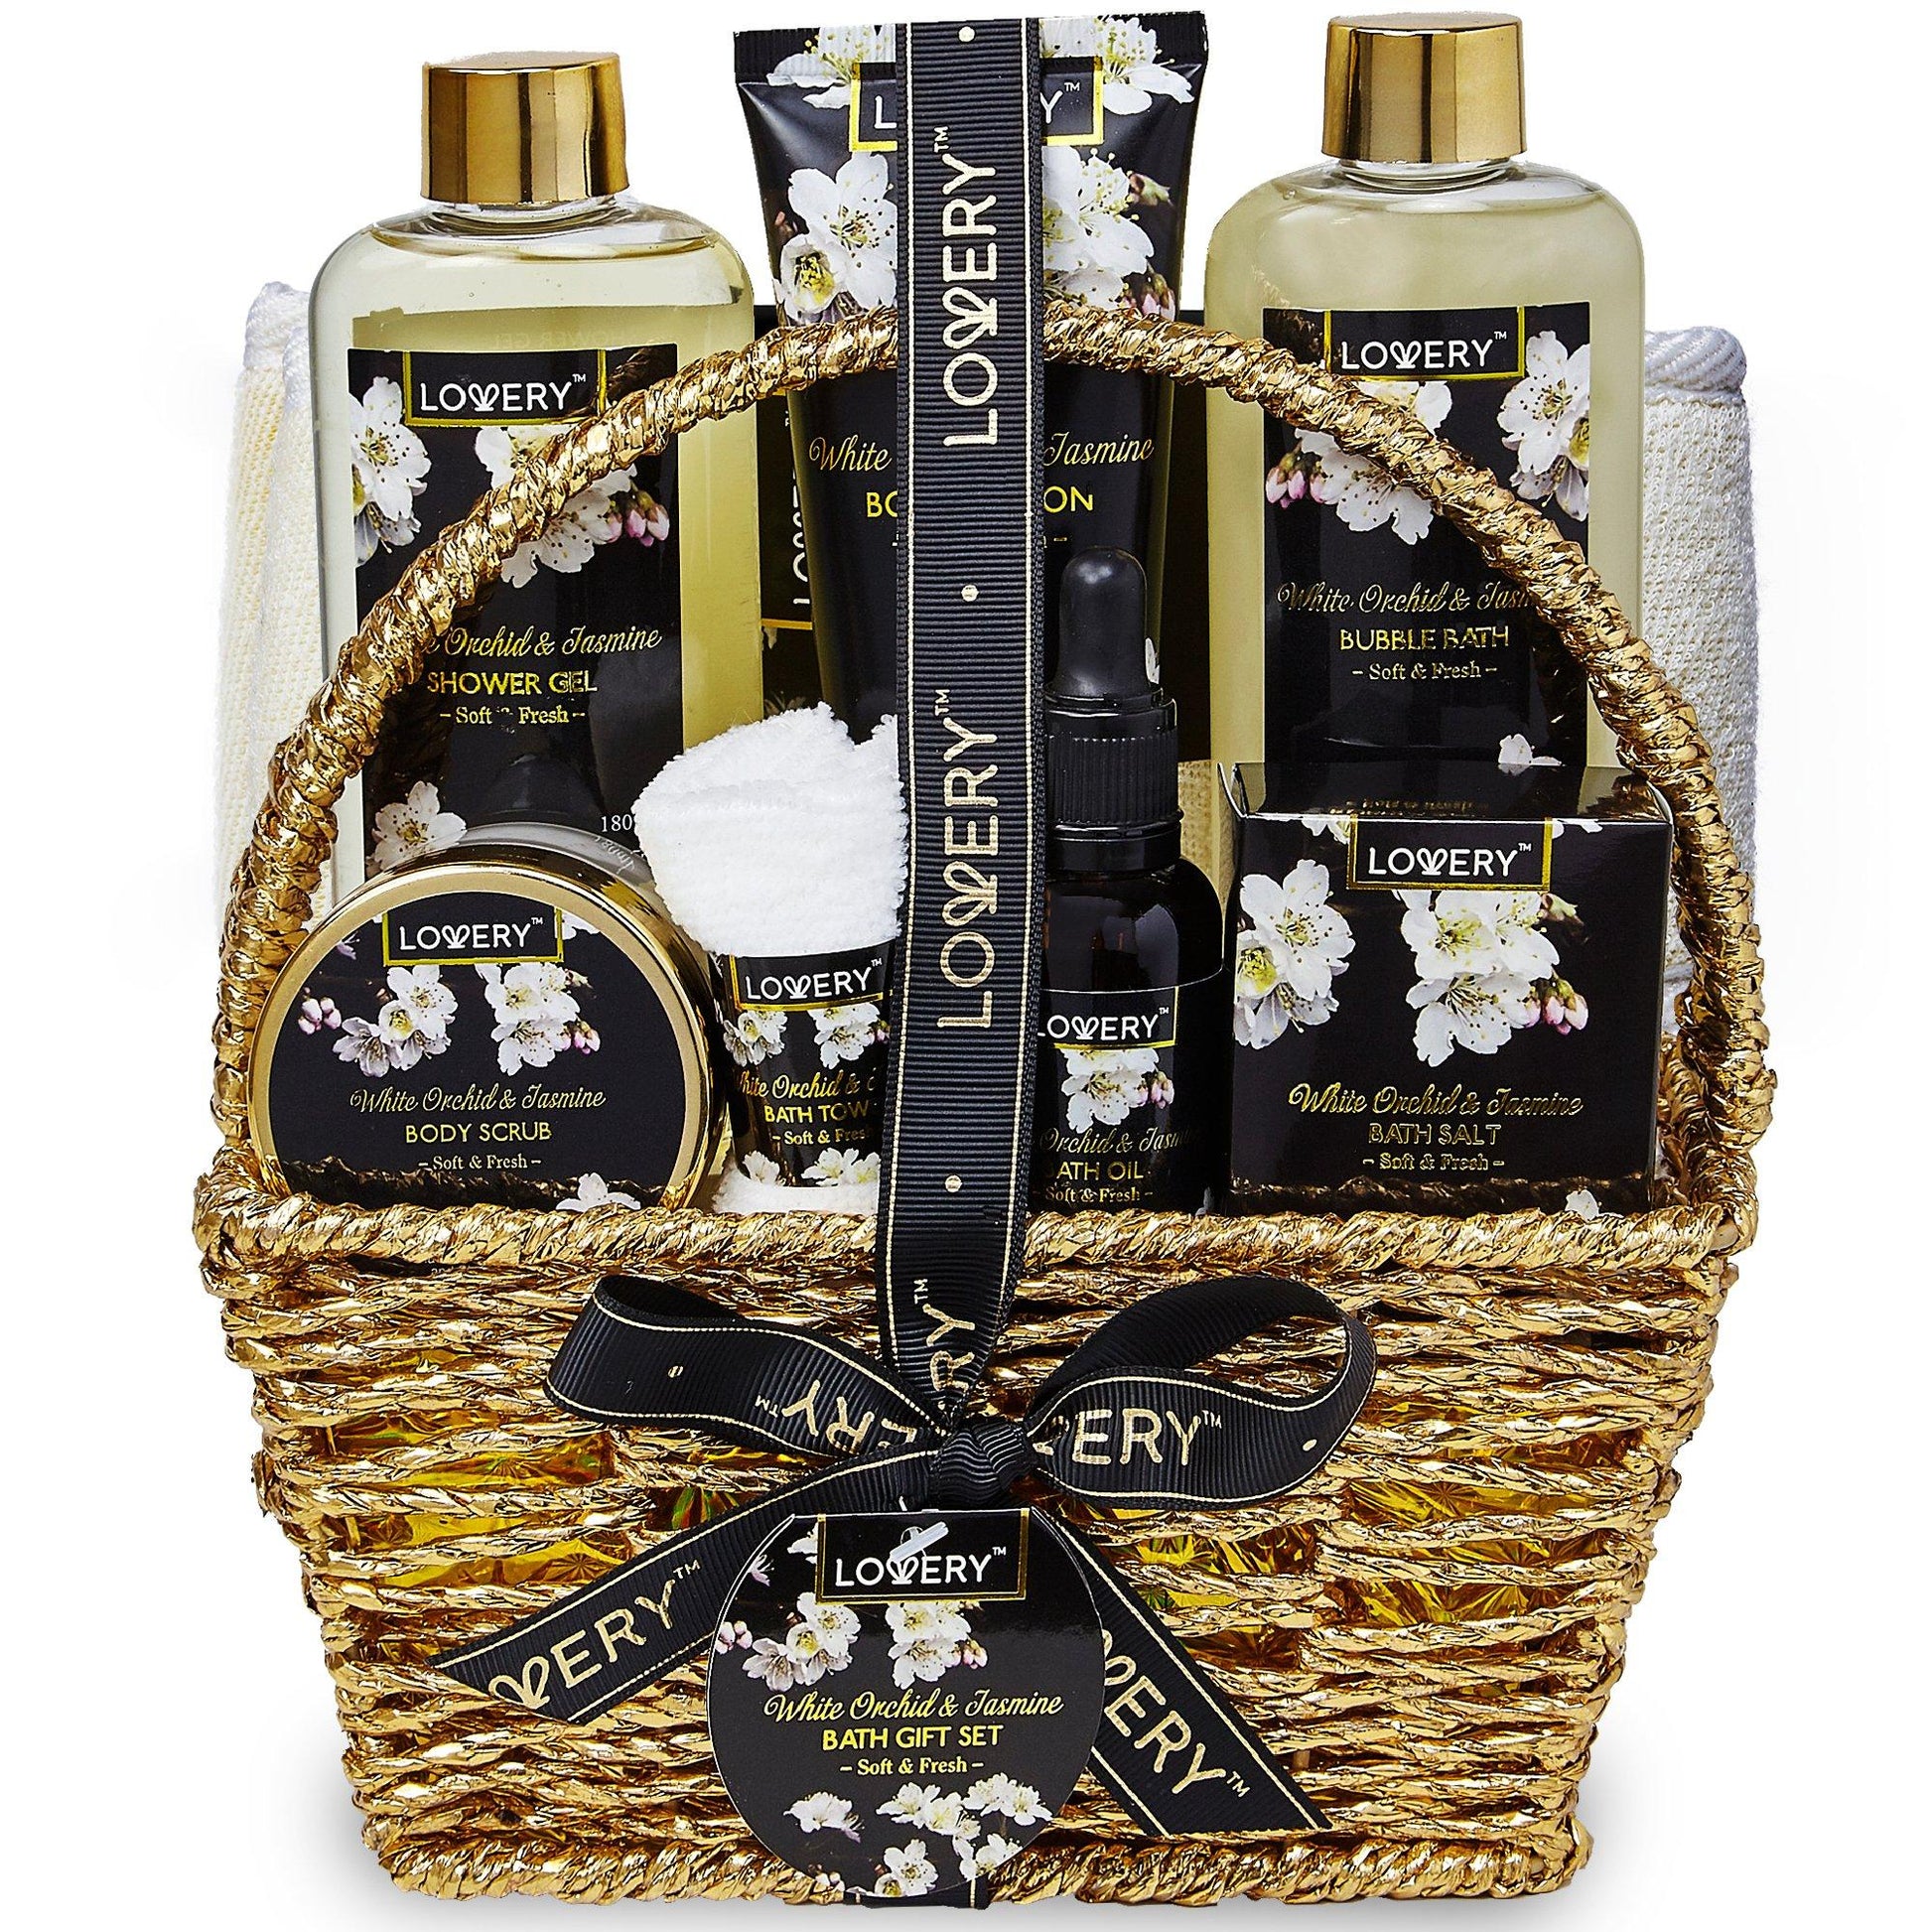 Spa Gifts Basket for Women - 10pc Spa Set Scented with Cherry Blossom in  Wicker Basket - Contains Bubble Bath, Bath Salts, Body Mist & More 